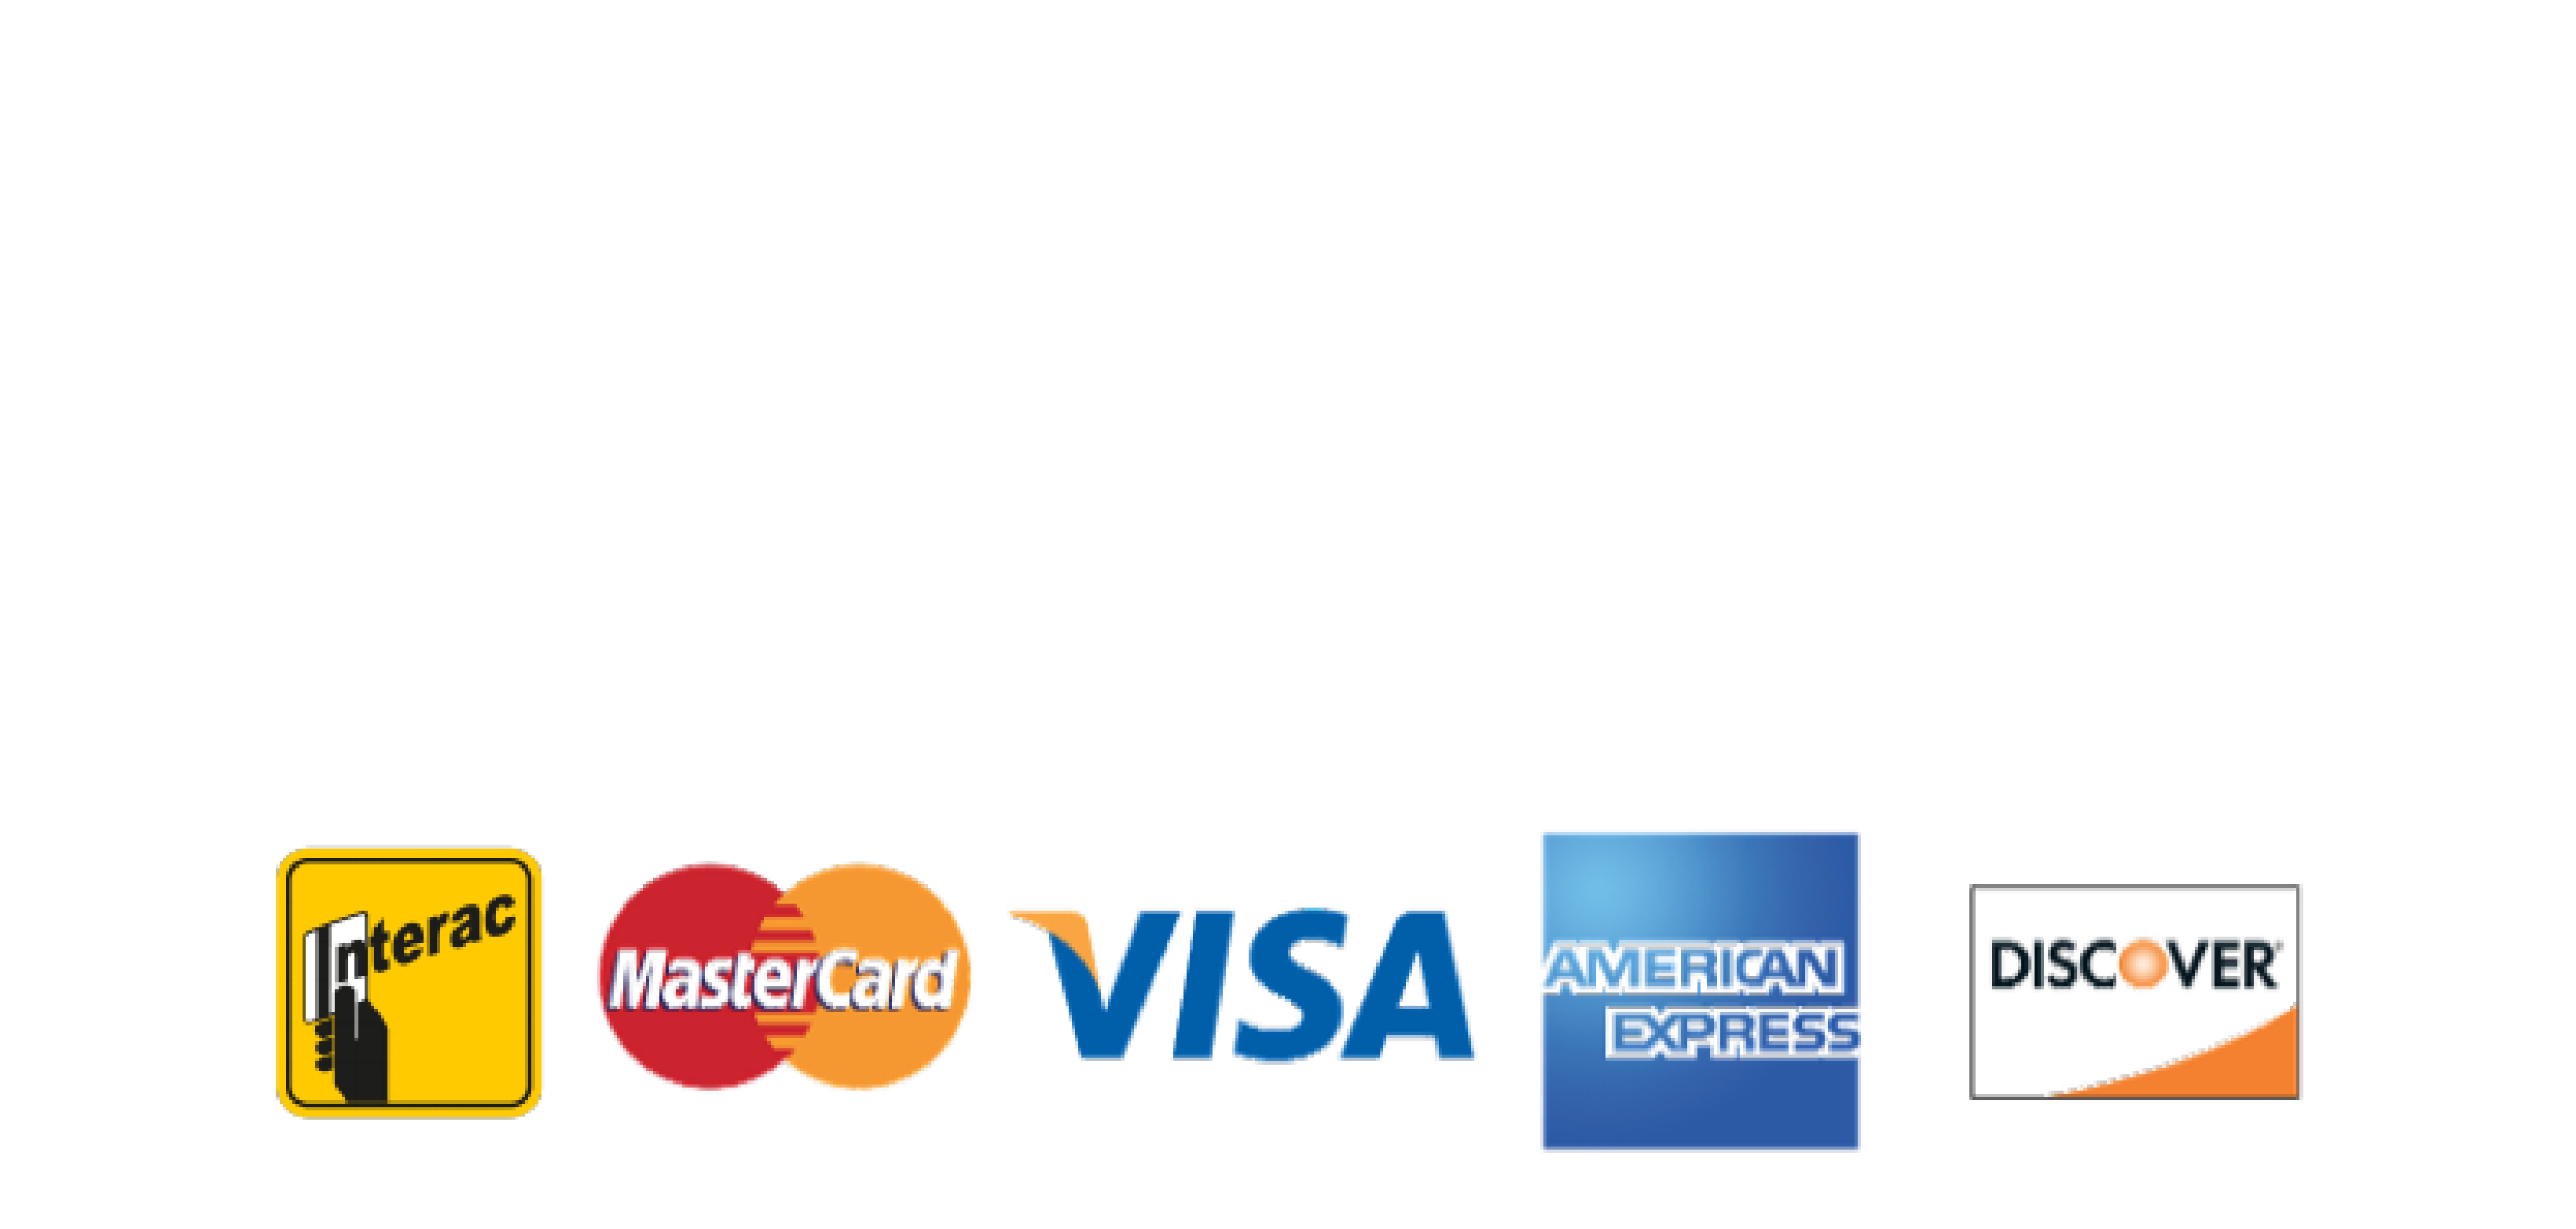 Square is used for our main payment system.